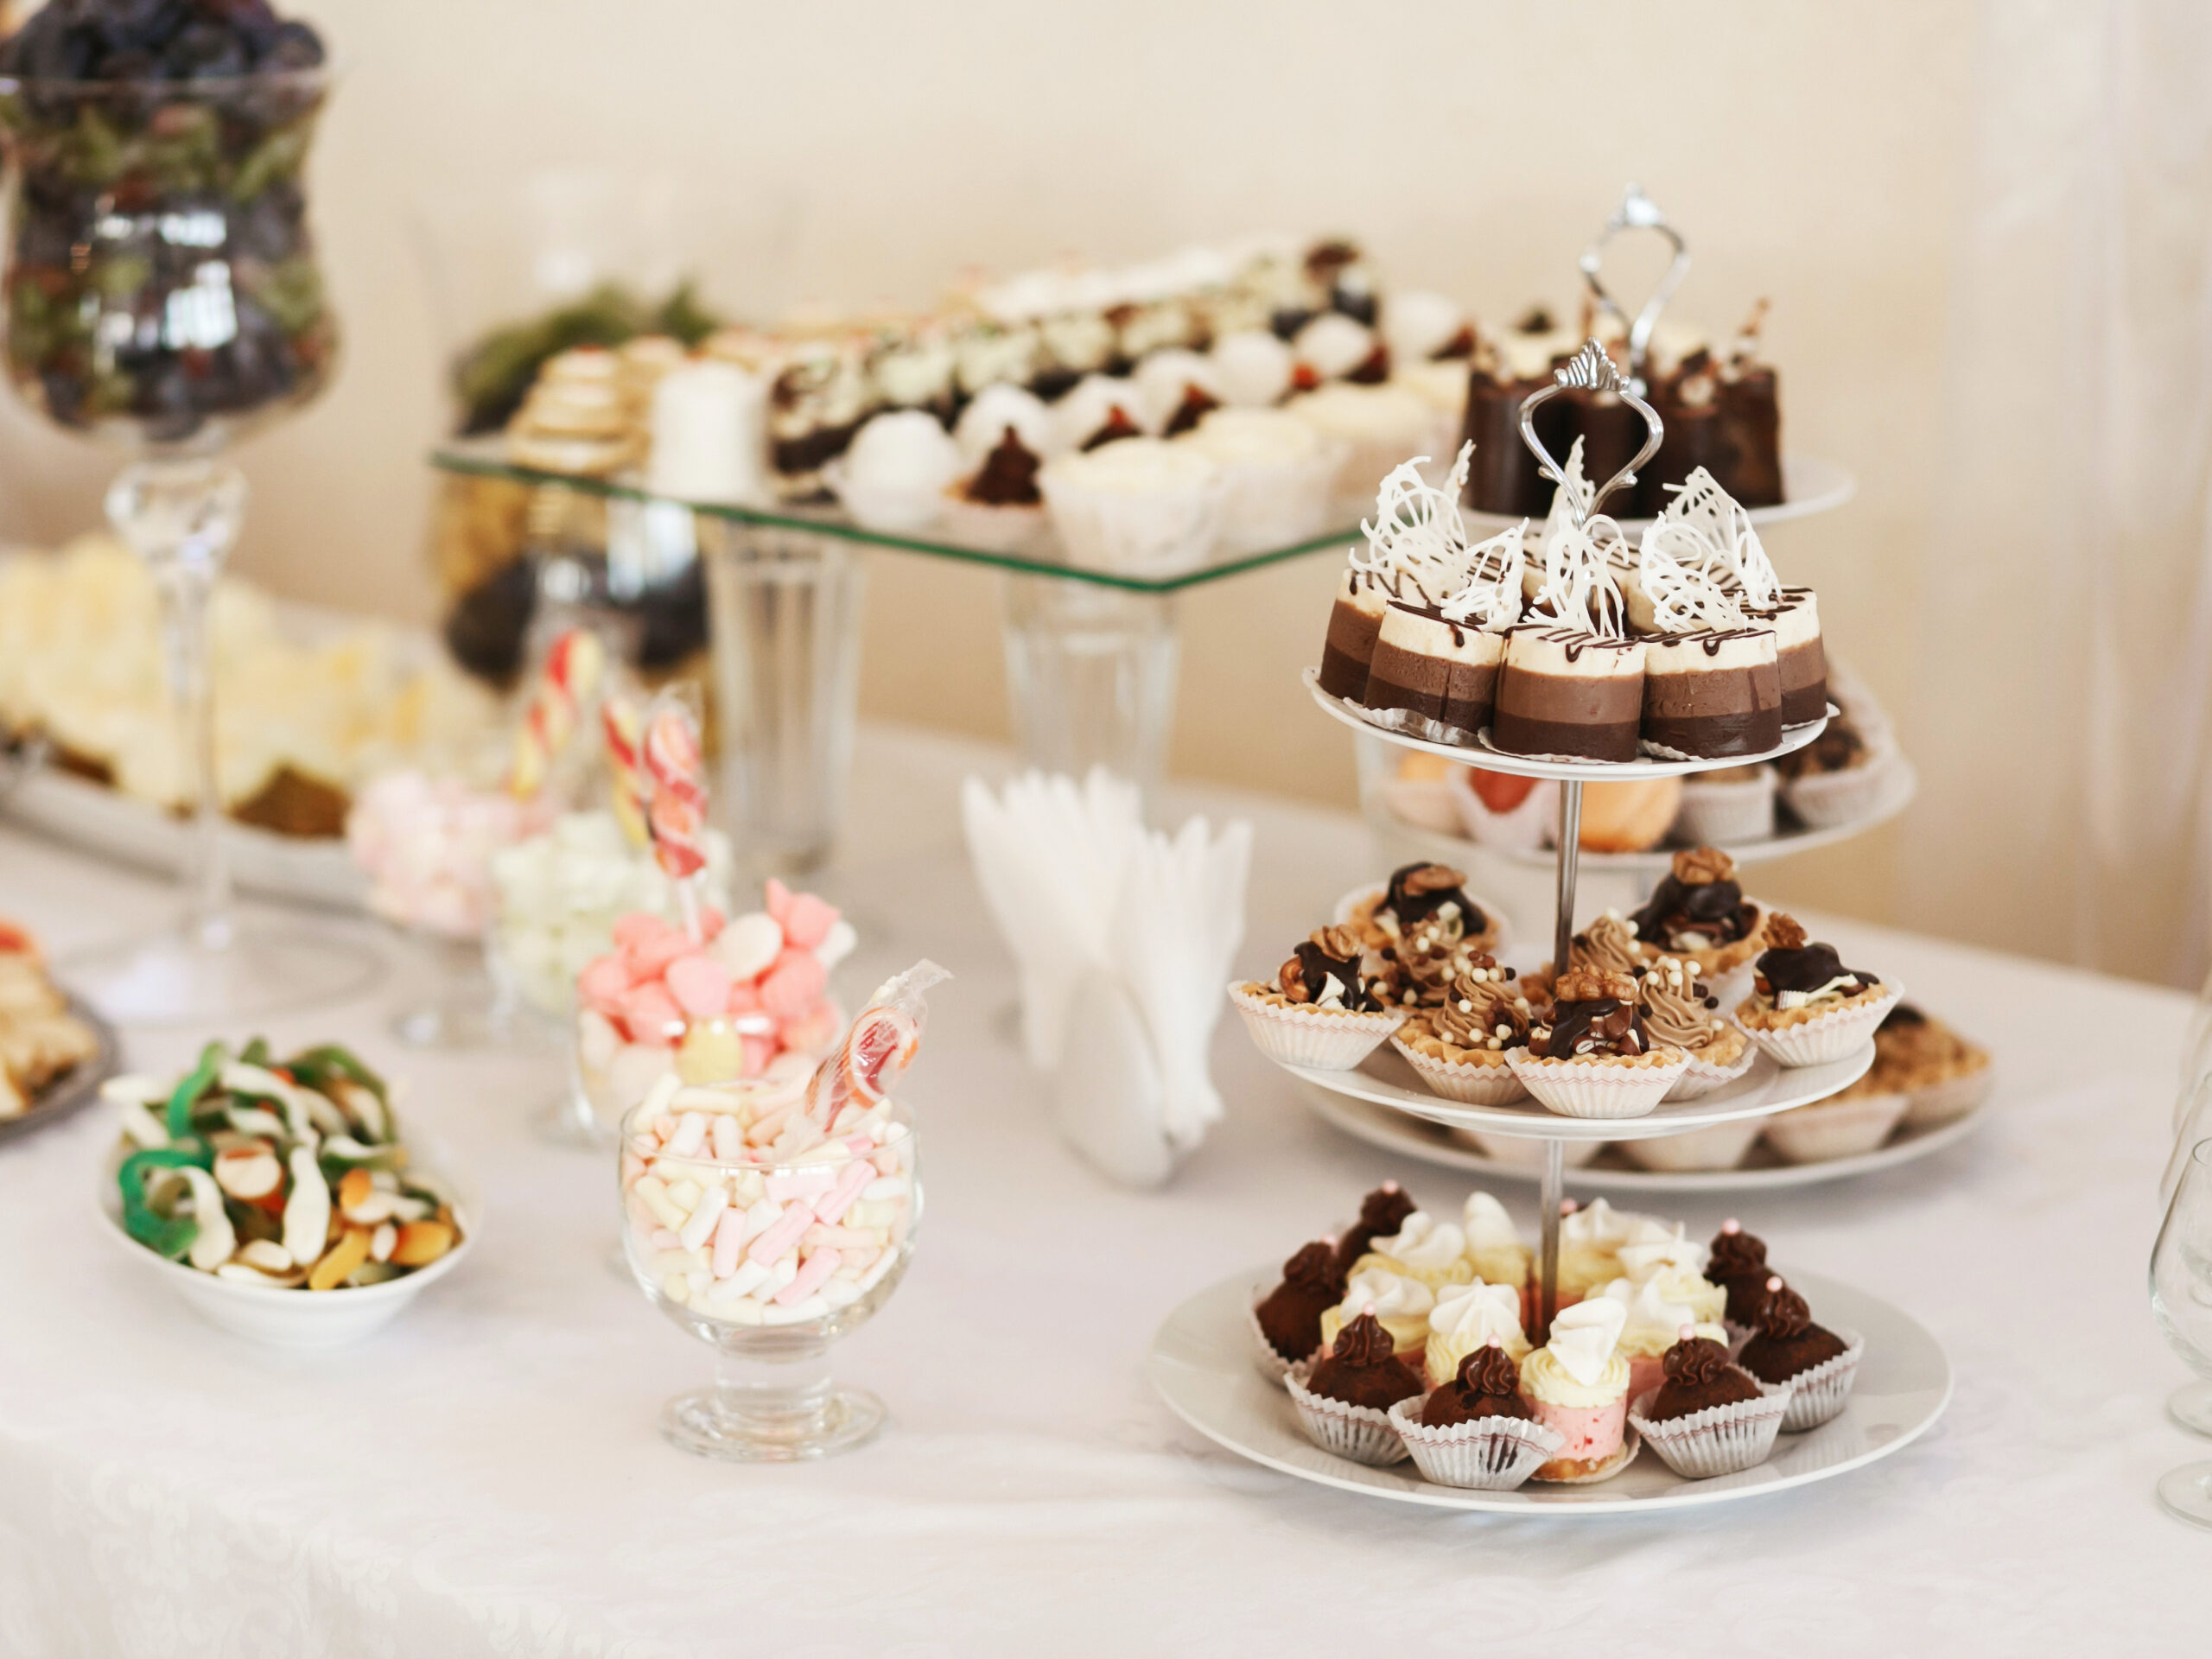 Sweet food on the table. Wedding feast. Catering food, service. Cafeteria, restaurant.